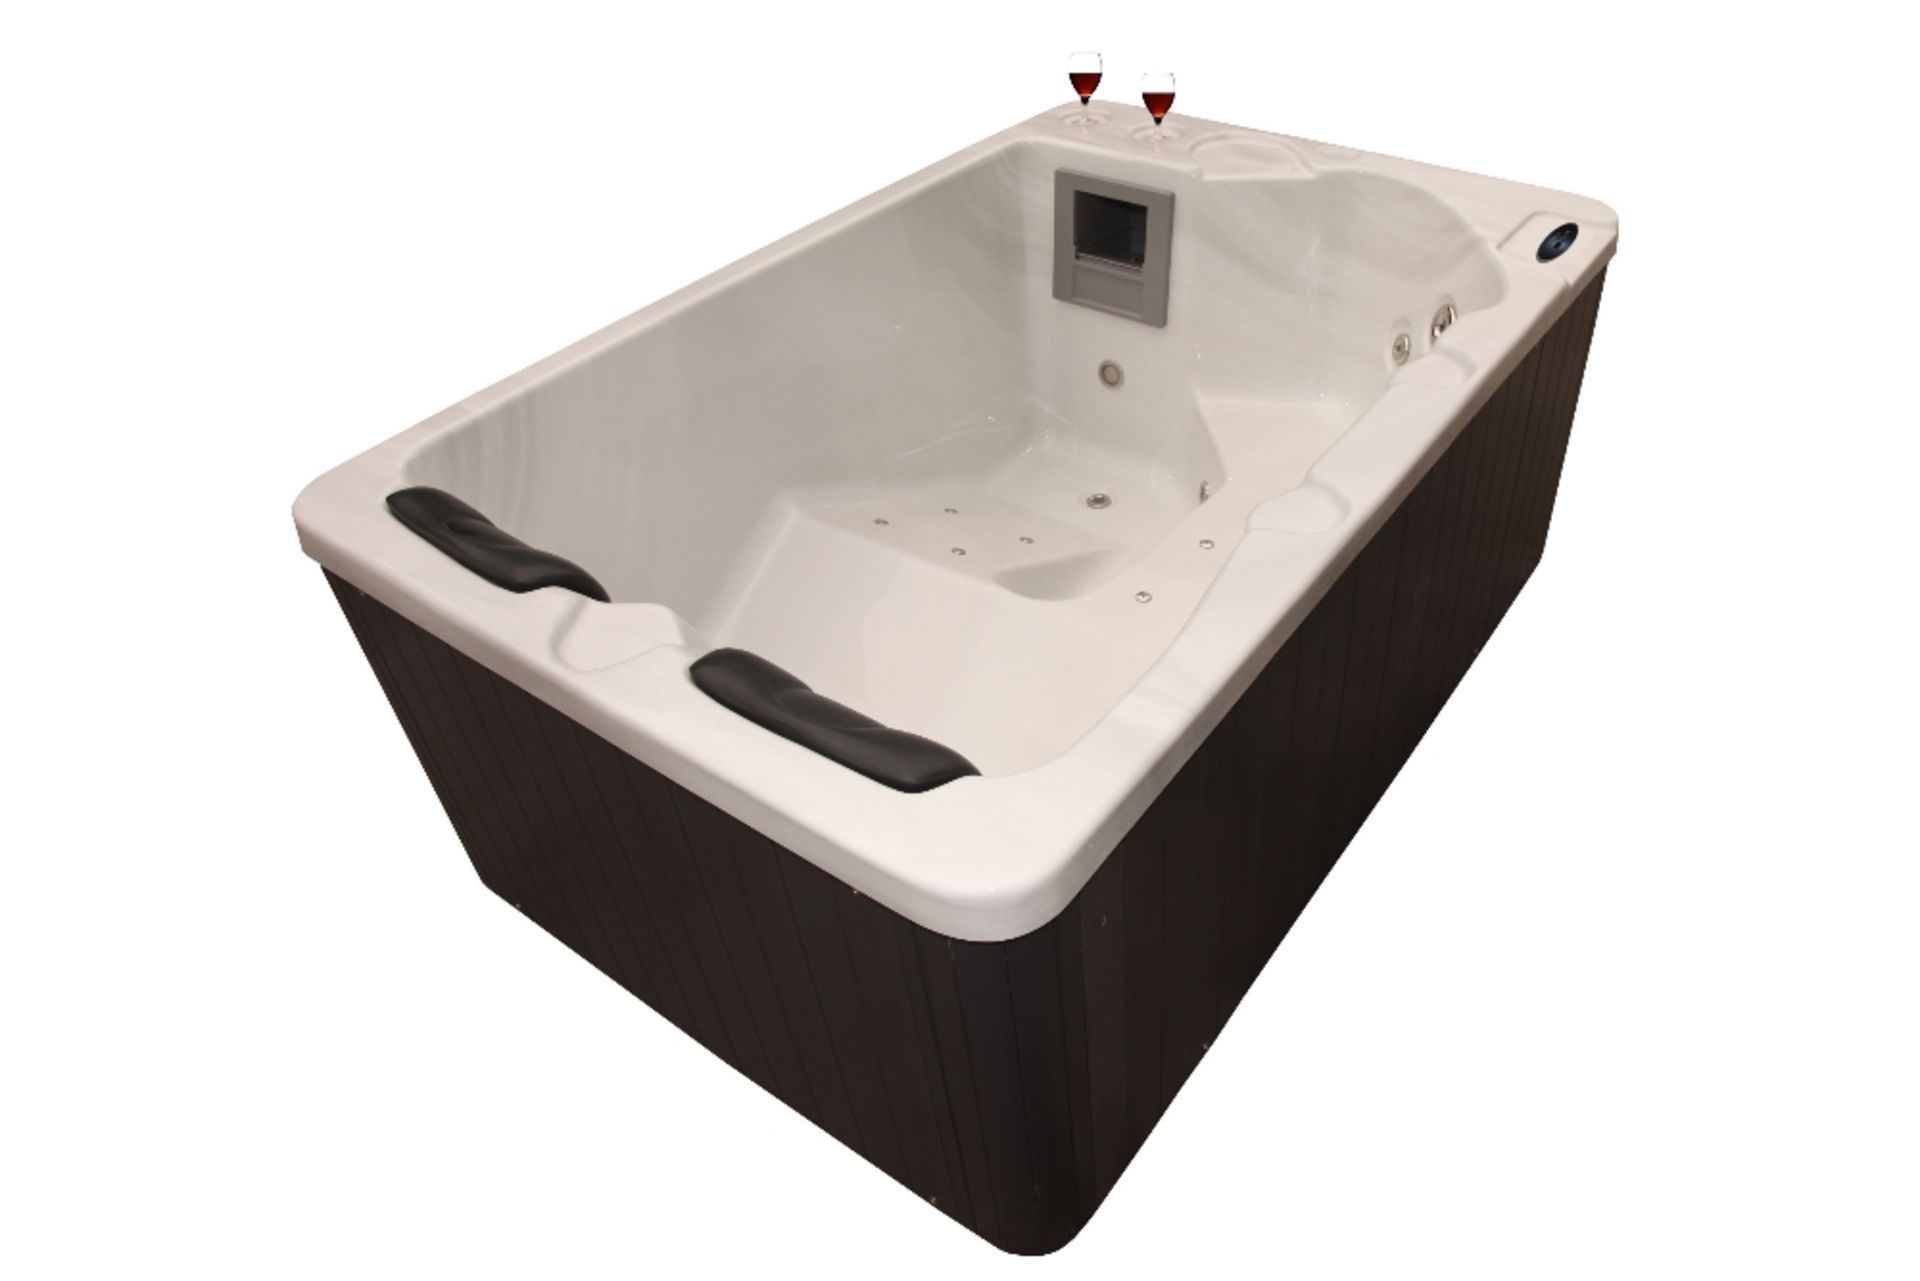 NEW PACKAGED 2016 HOT TUB, MATCHING STEPS, SIDE, INSULATING COVER, TOP USA RUNNING GEAR, USA Balboa - Image 3 of 4